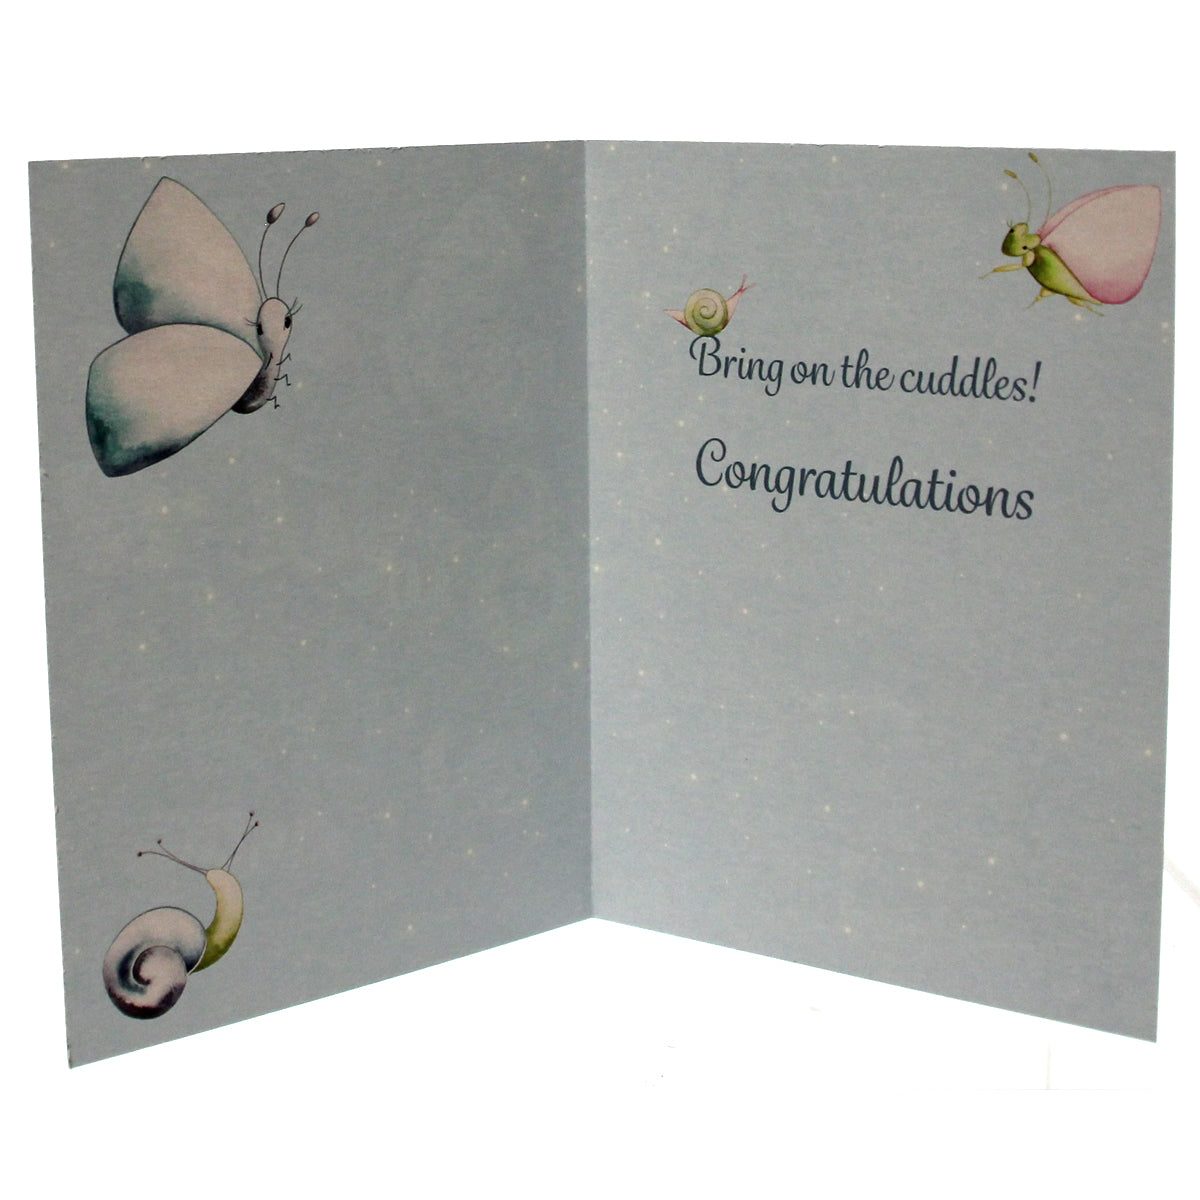 Baby Notions Card : Snug as a sweet baby bug